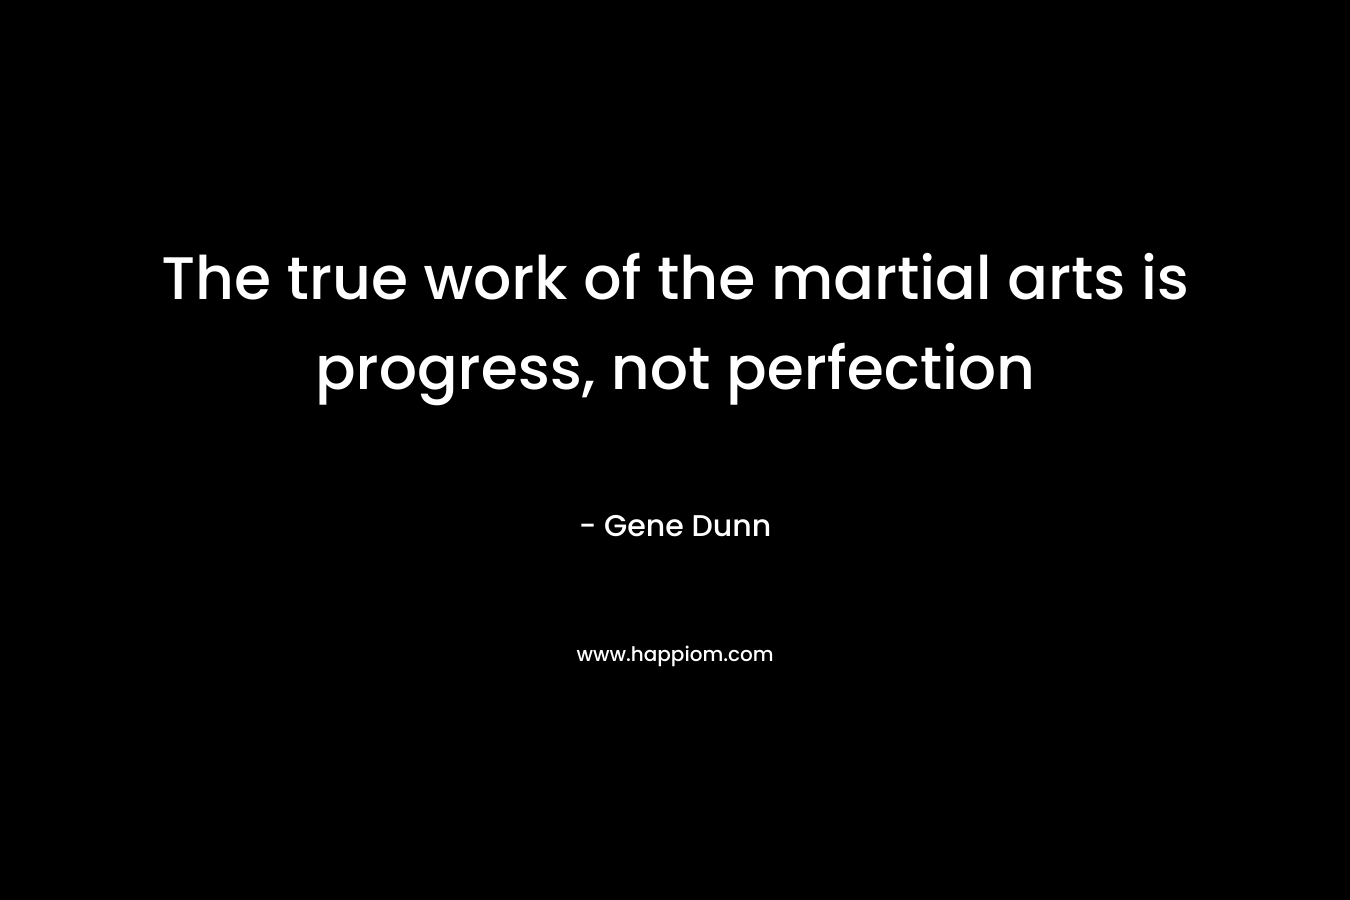 The true work of the martial arts is progress, not perfection